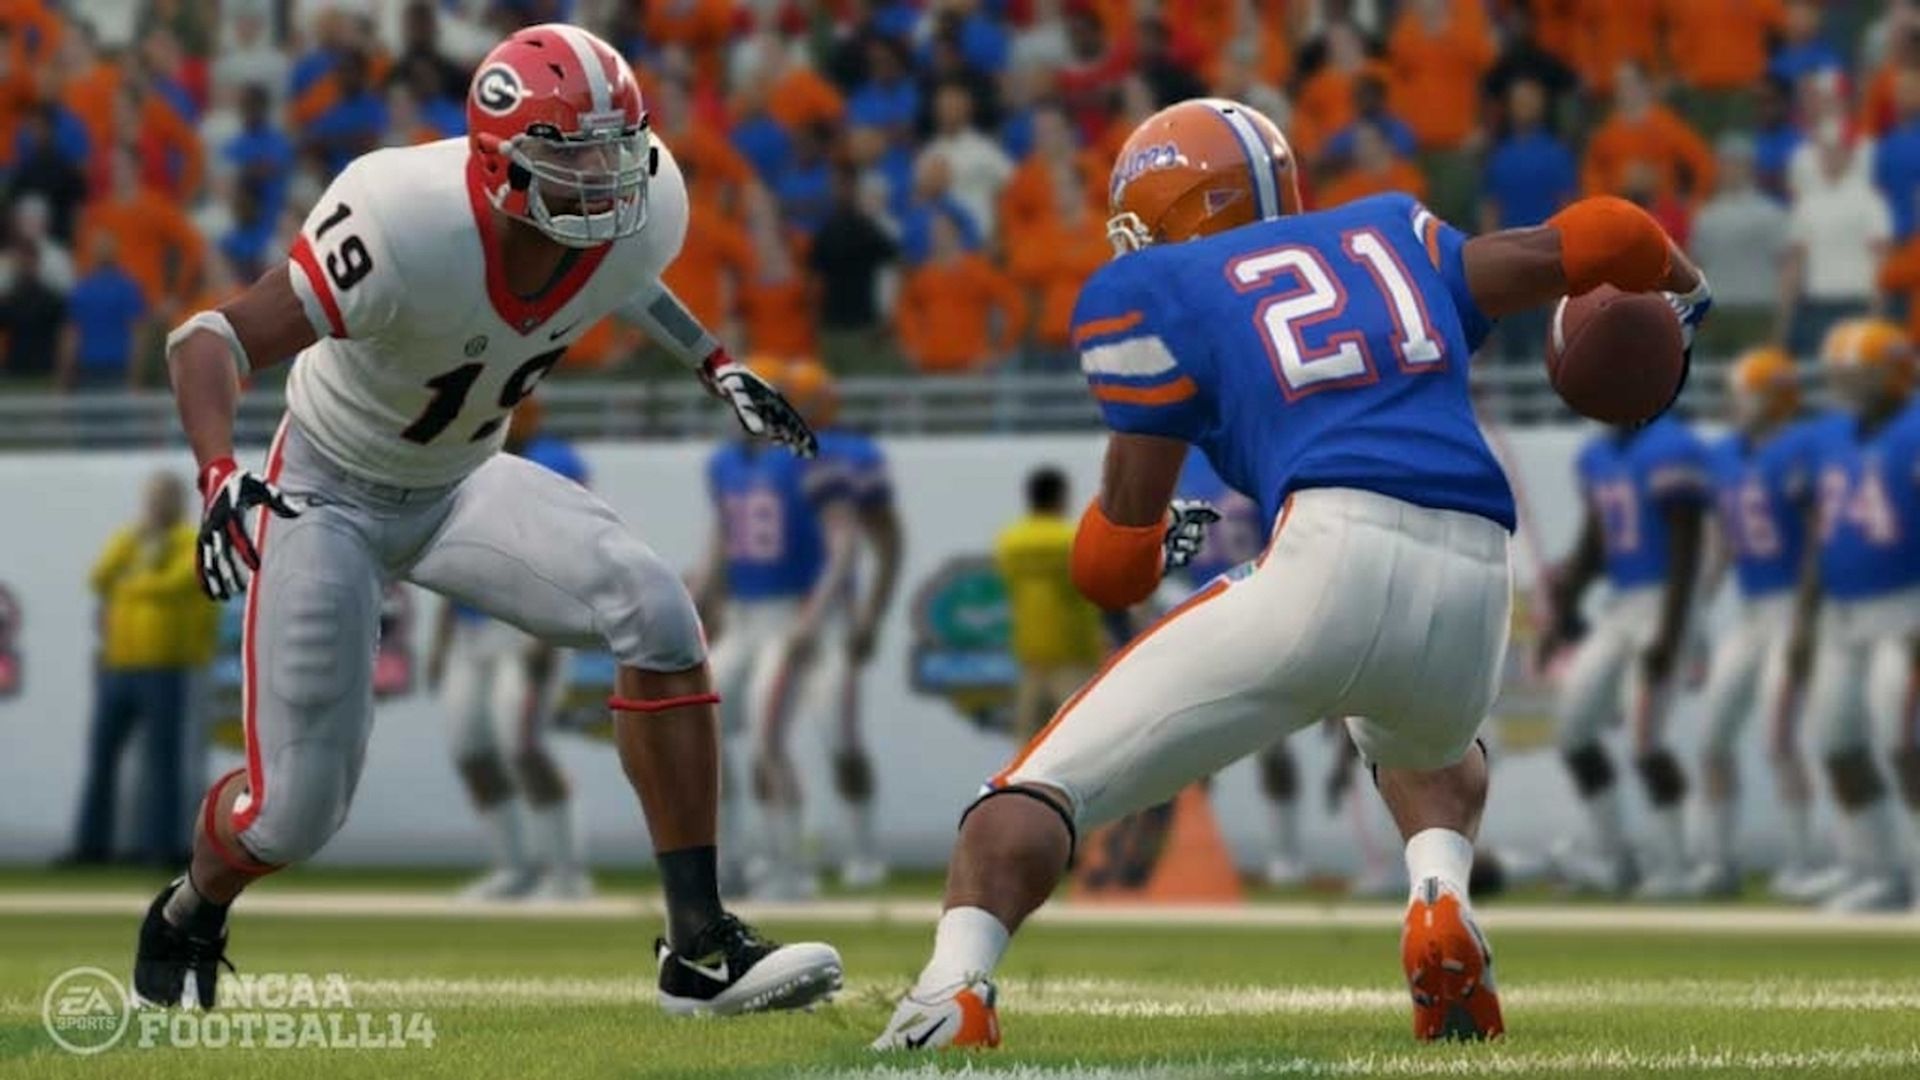 Video game screenshot of college football players facing off